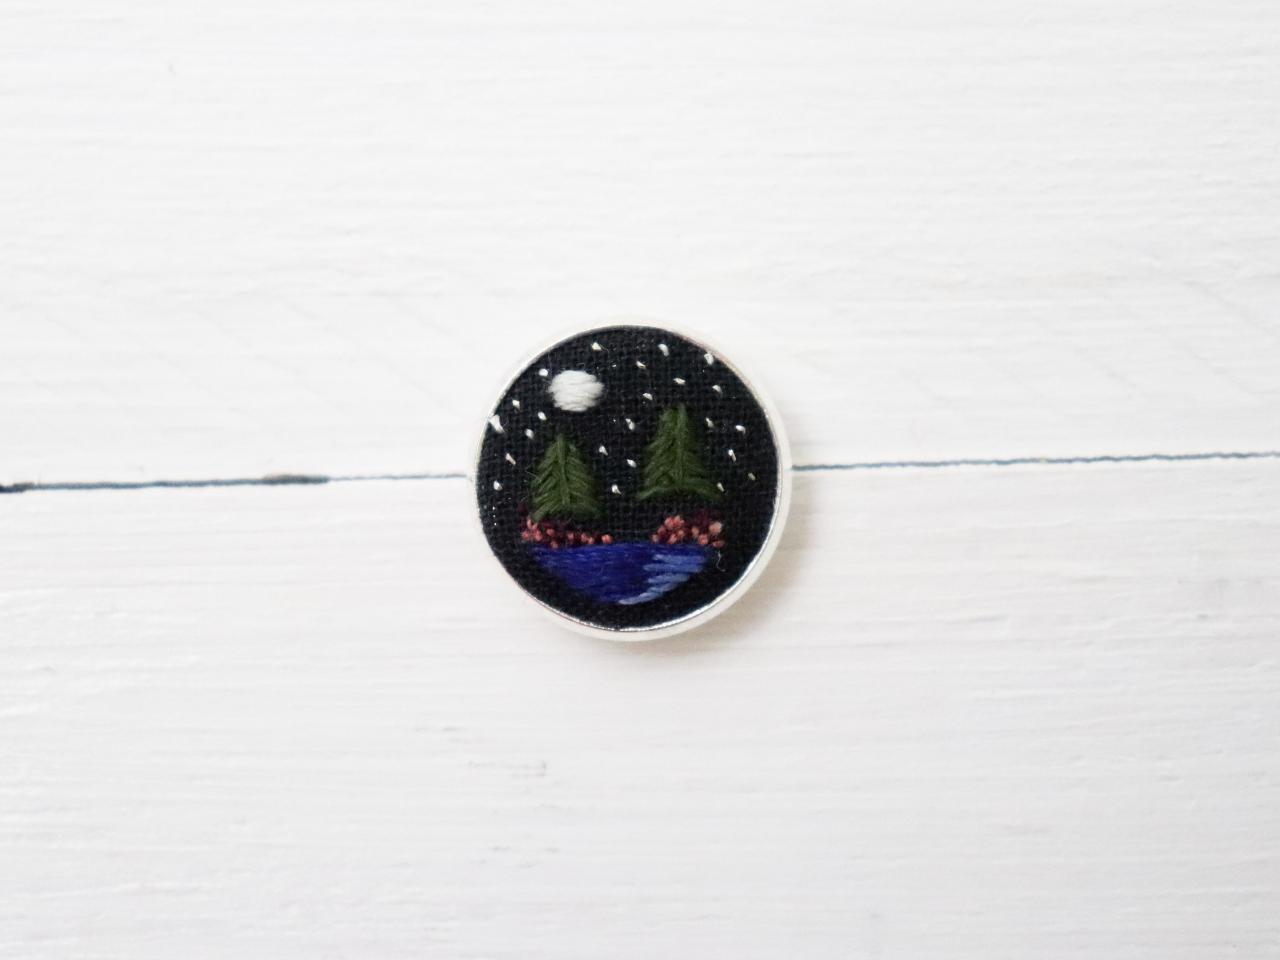 Miniature Embroidery Pin Night Forest Brooch Night Forest Pin Embroidery Pin Hand Embroidery Embroidered Pin Night Sky Collar Pin Forest Pin